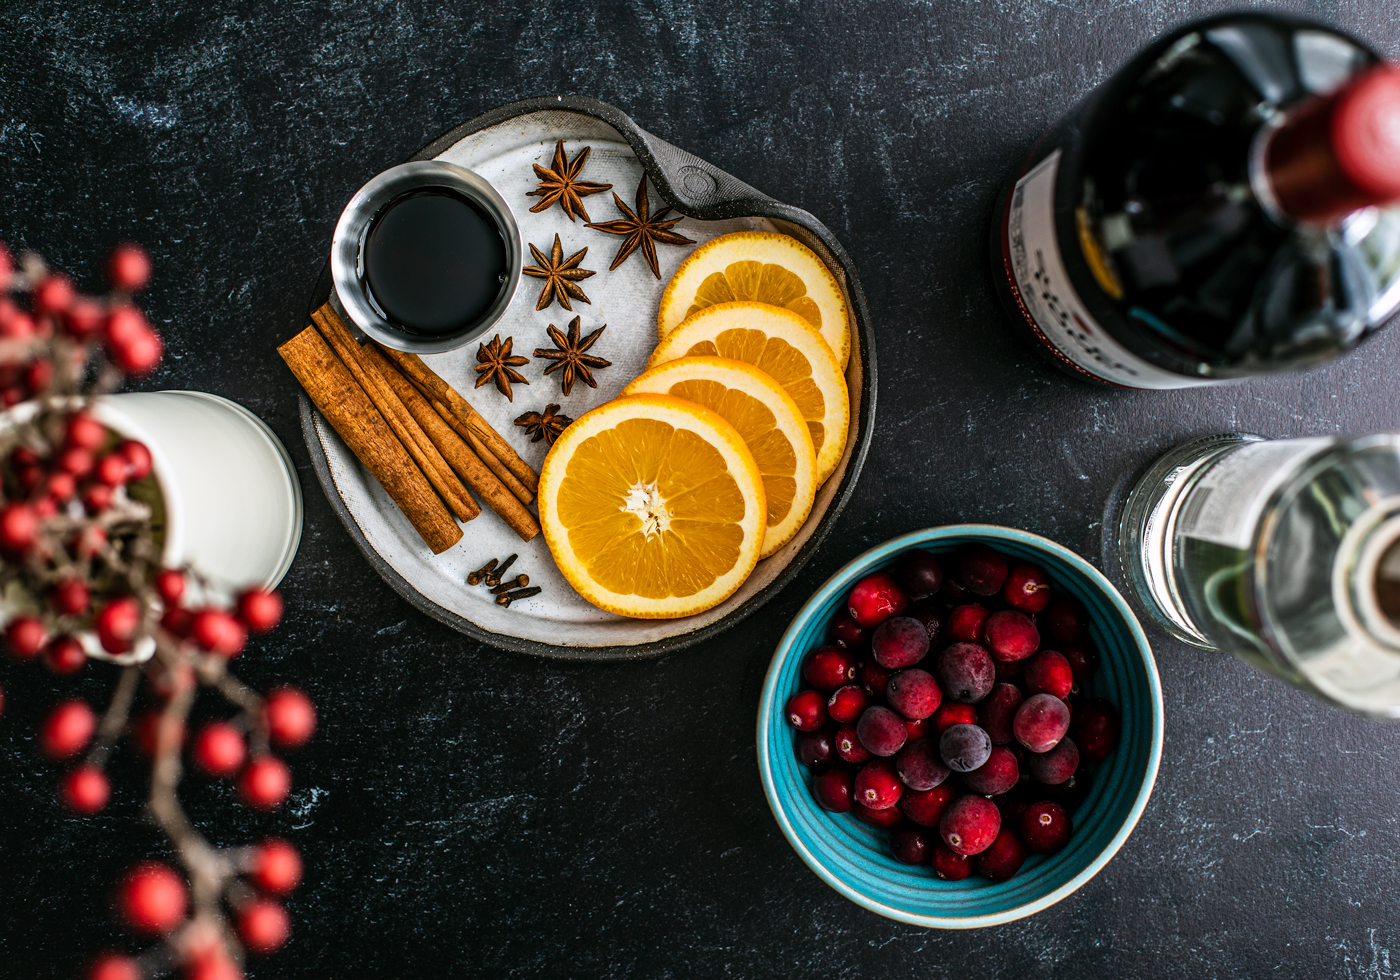 Plate with orange slices, cinnamon sticks, star anise, and dip bowl of maple syrup next to bowl of cranberries, bottle of red wine, and bottle of vodka.